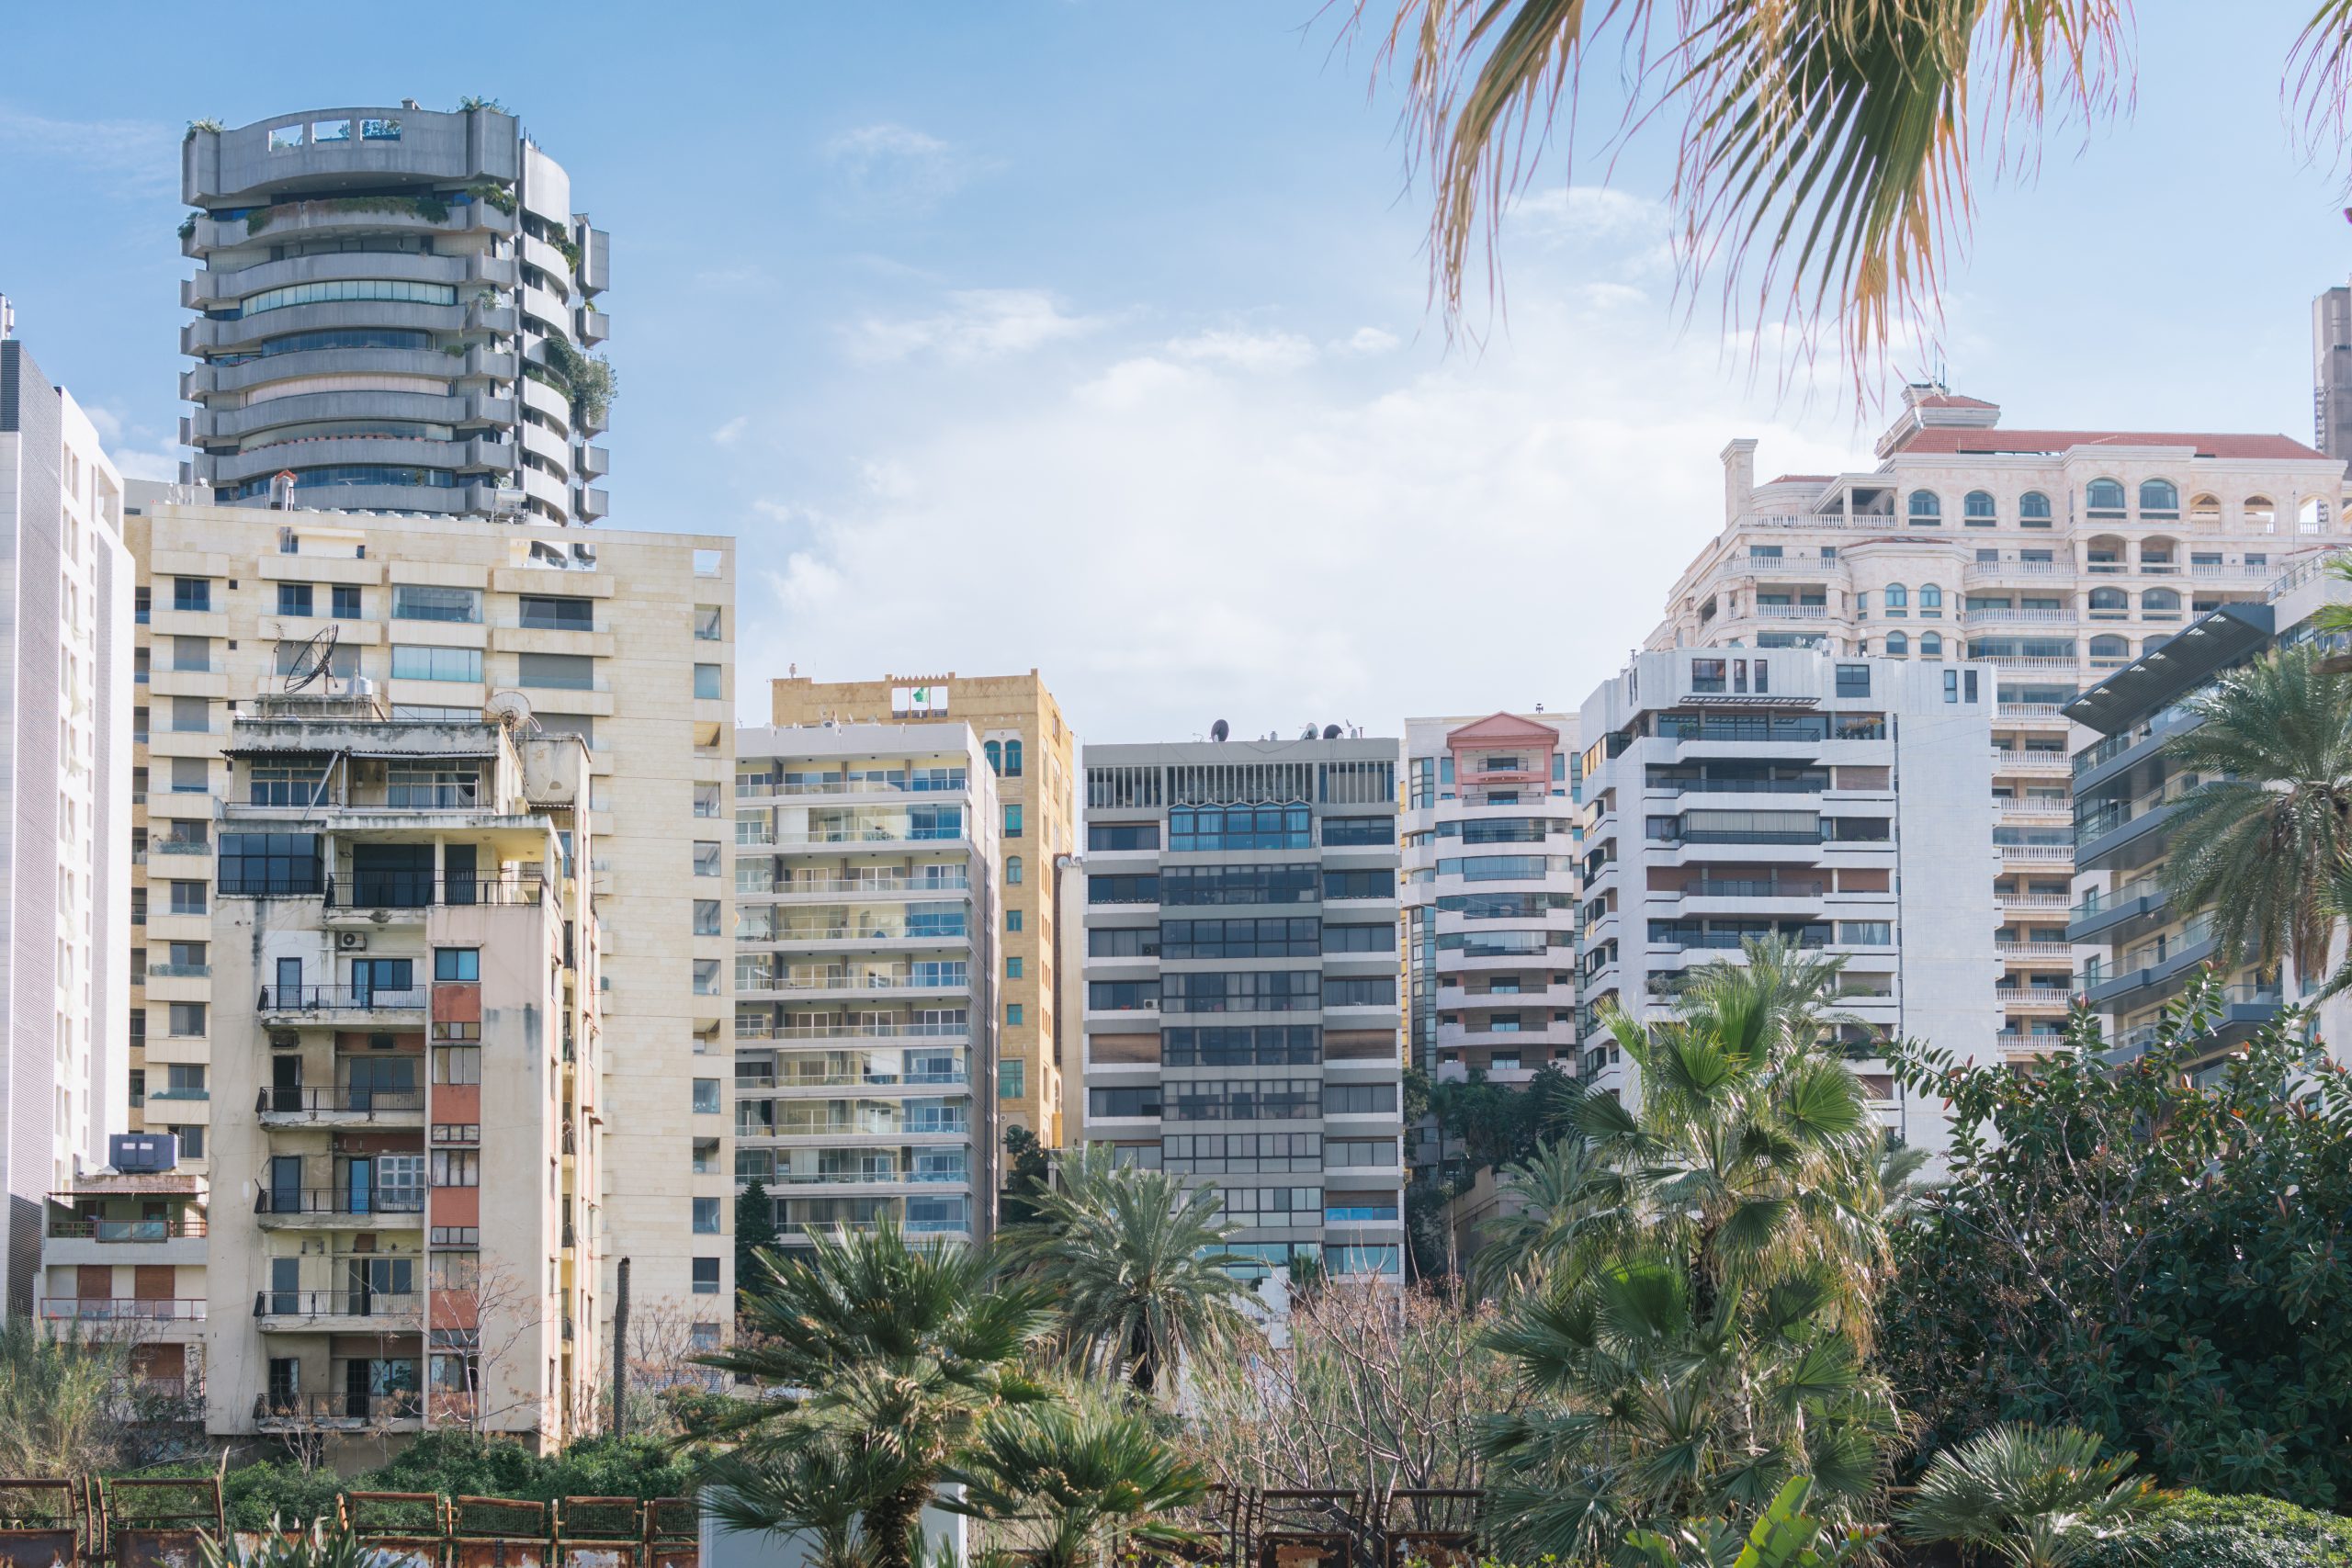 Photograph of a group of apartment buildings in Beirut